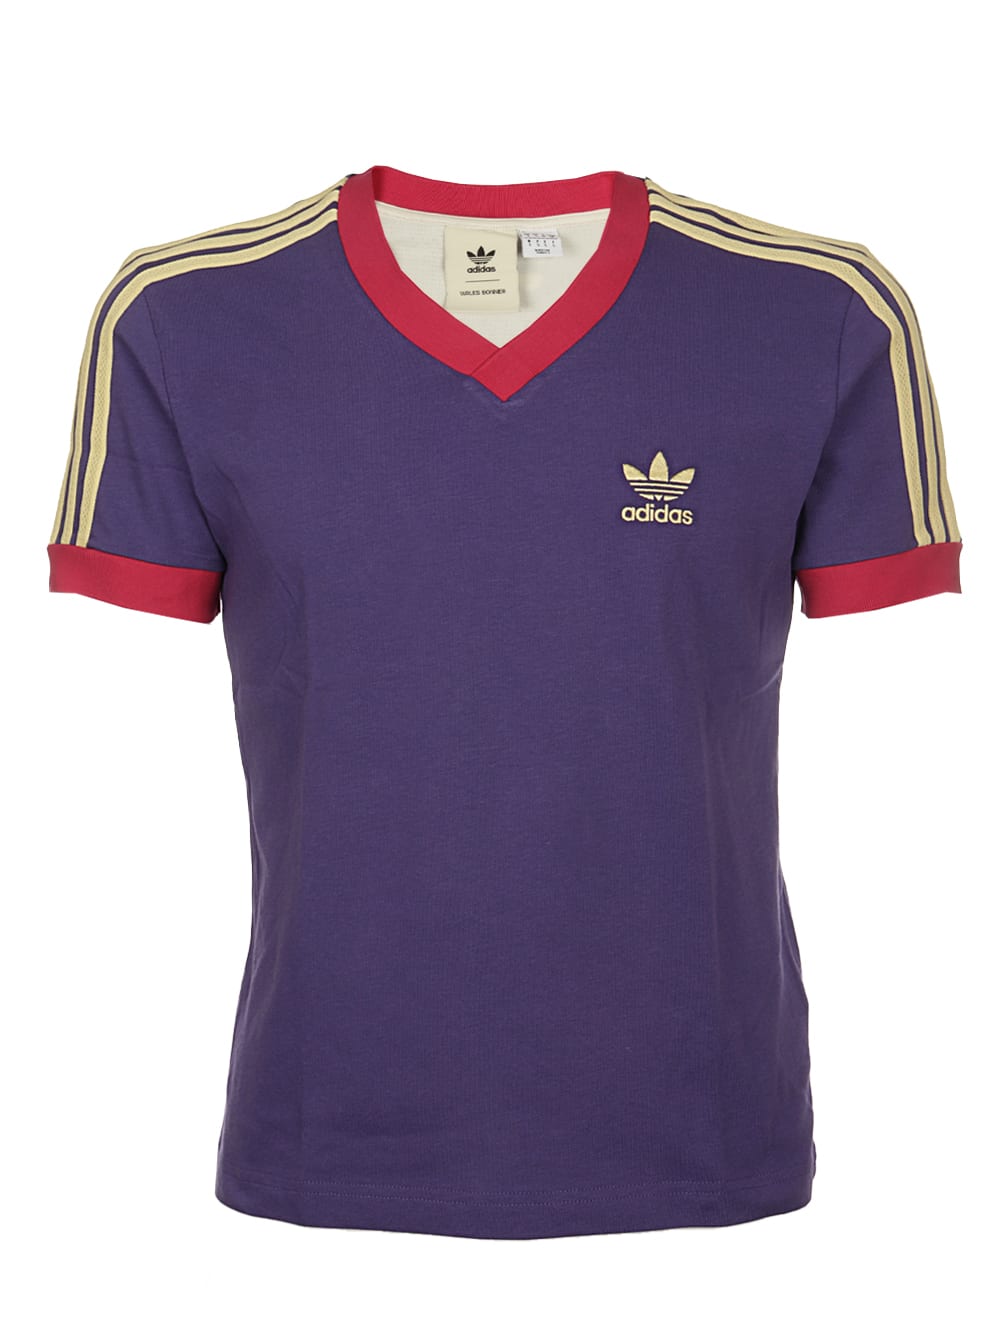 Adidas Originals By Wales Bonner Wb 70s V-neck In Unipur